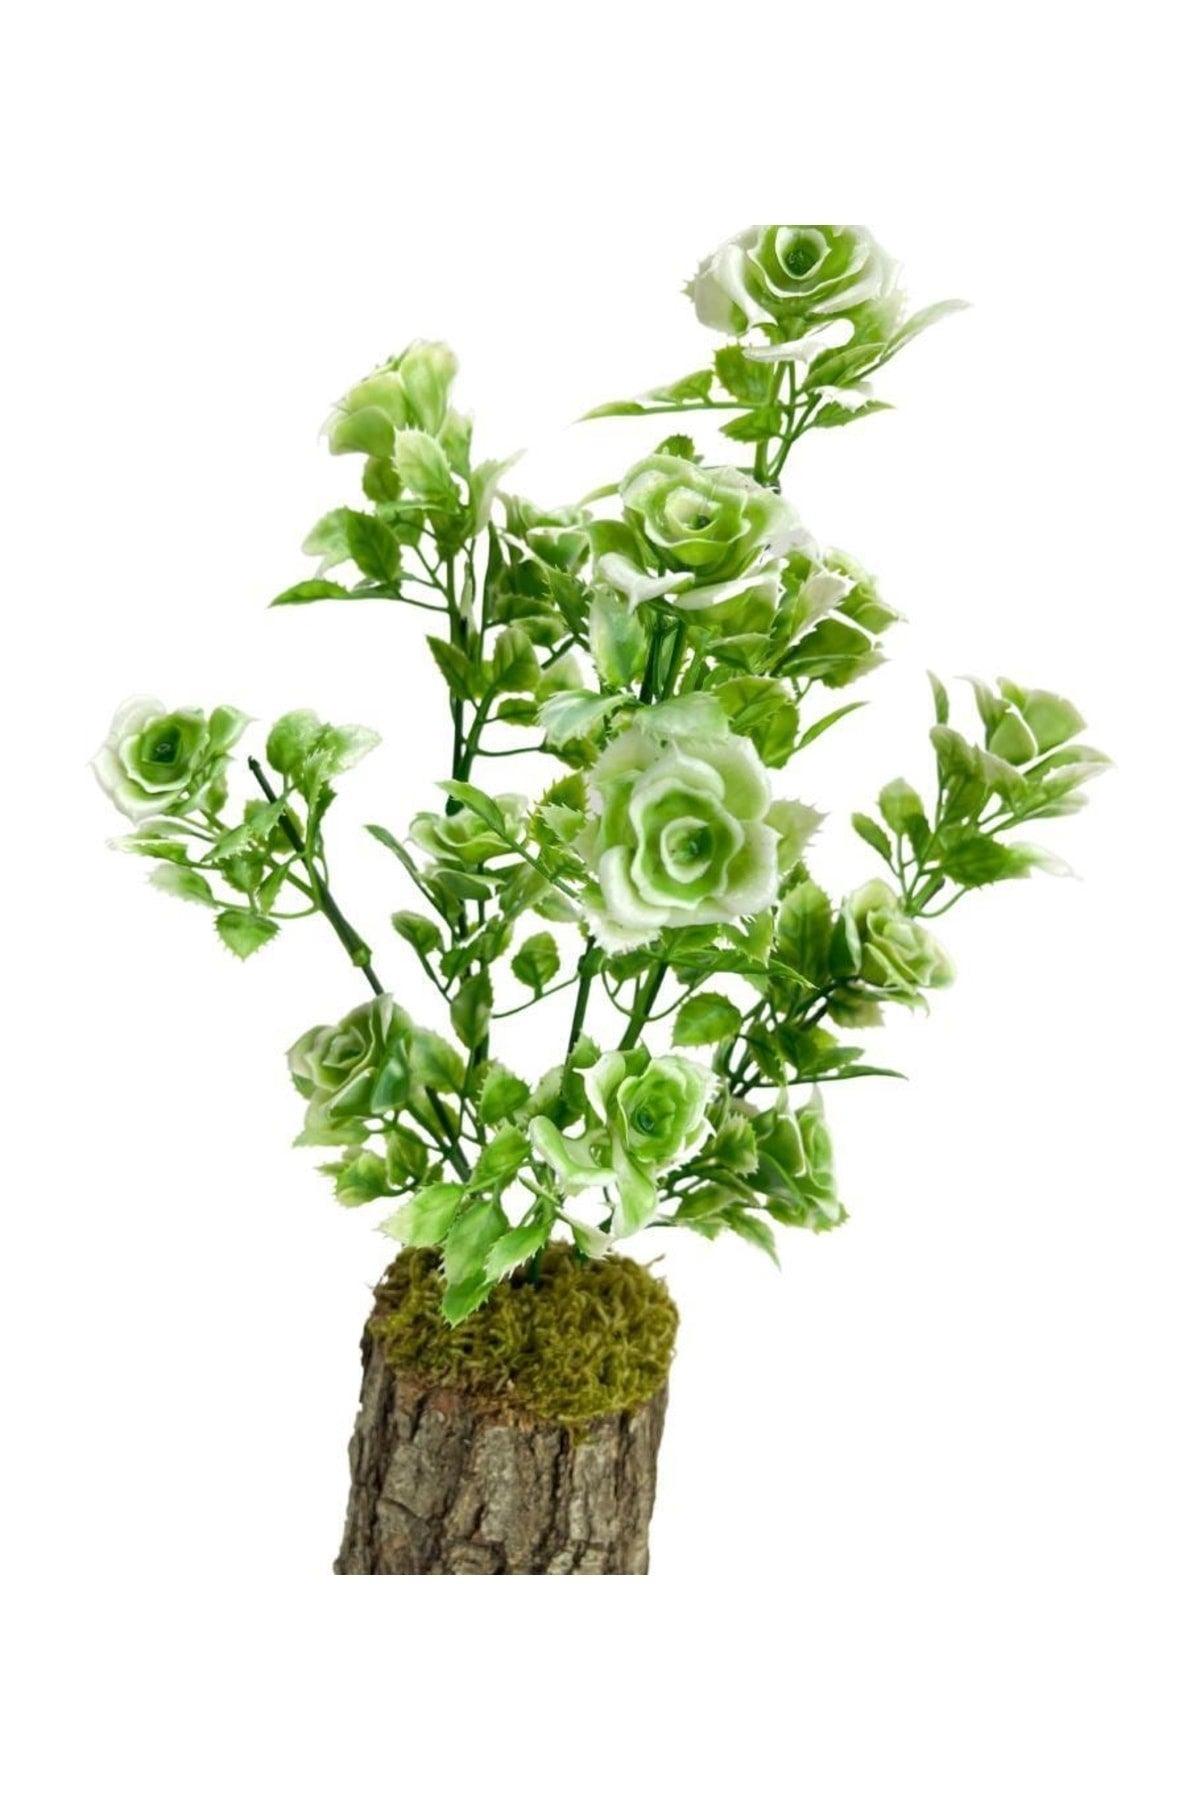 Artificial Flower Bunch of Green White Roses on a Log Decorative Table Flower 30*20cm - Swordslife